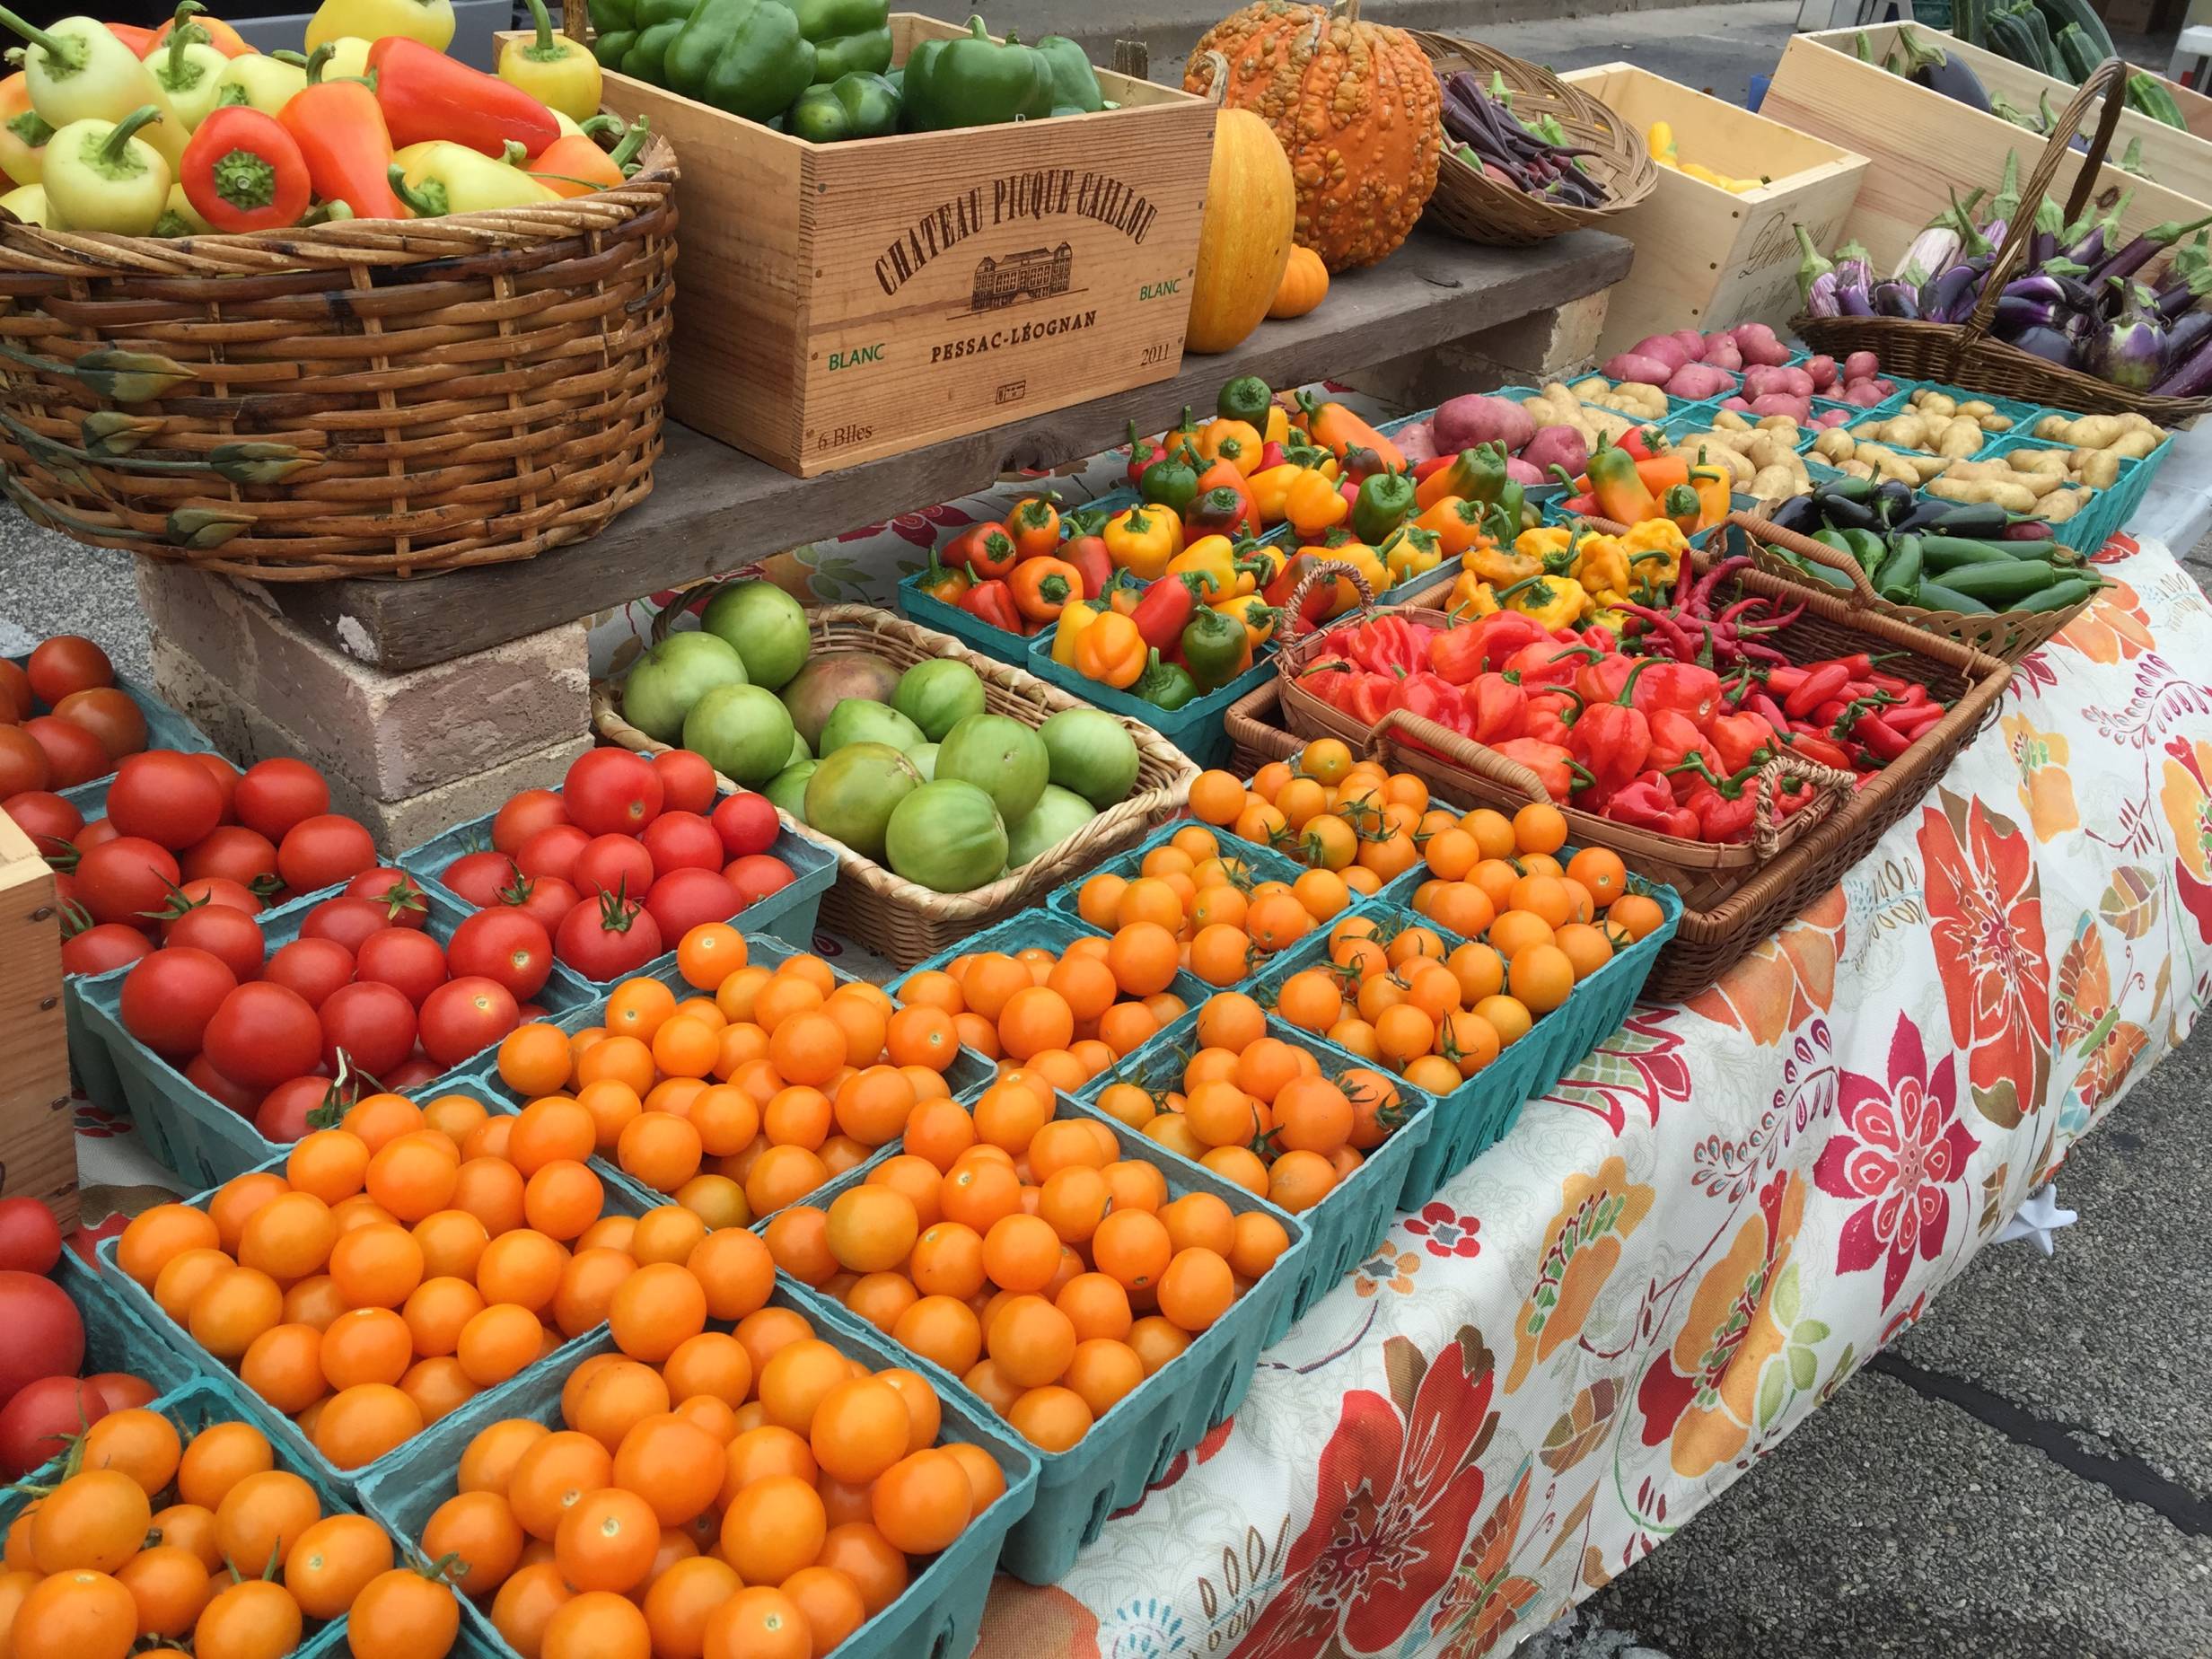 Champaign Farmers’ Market set to open May 15th and they want your input